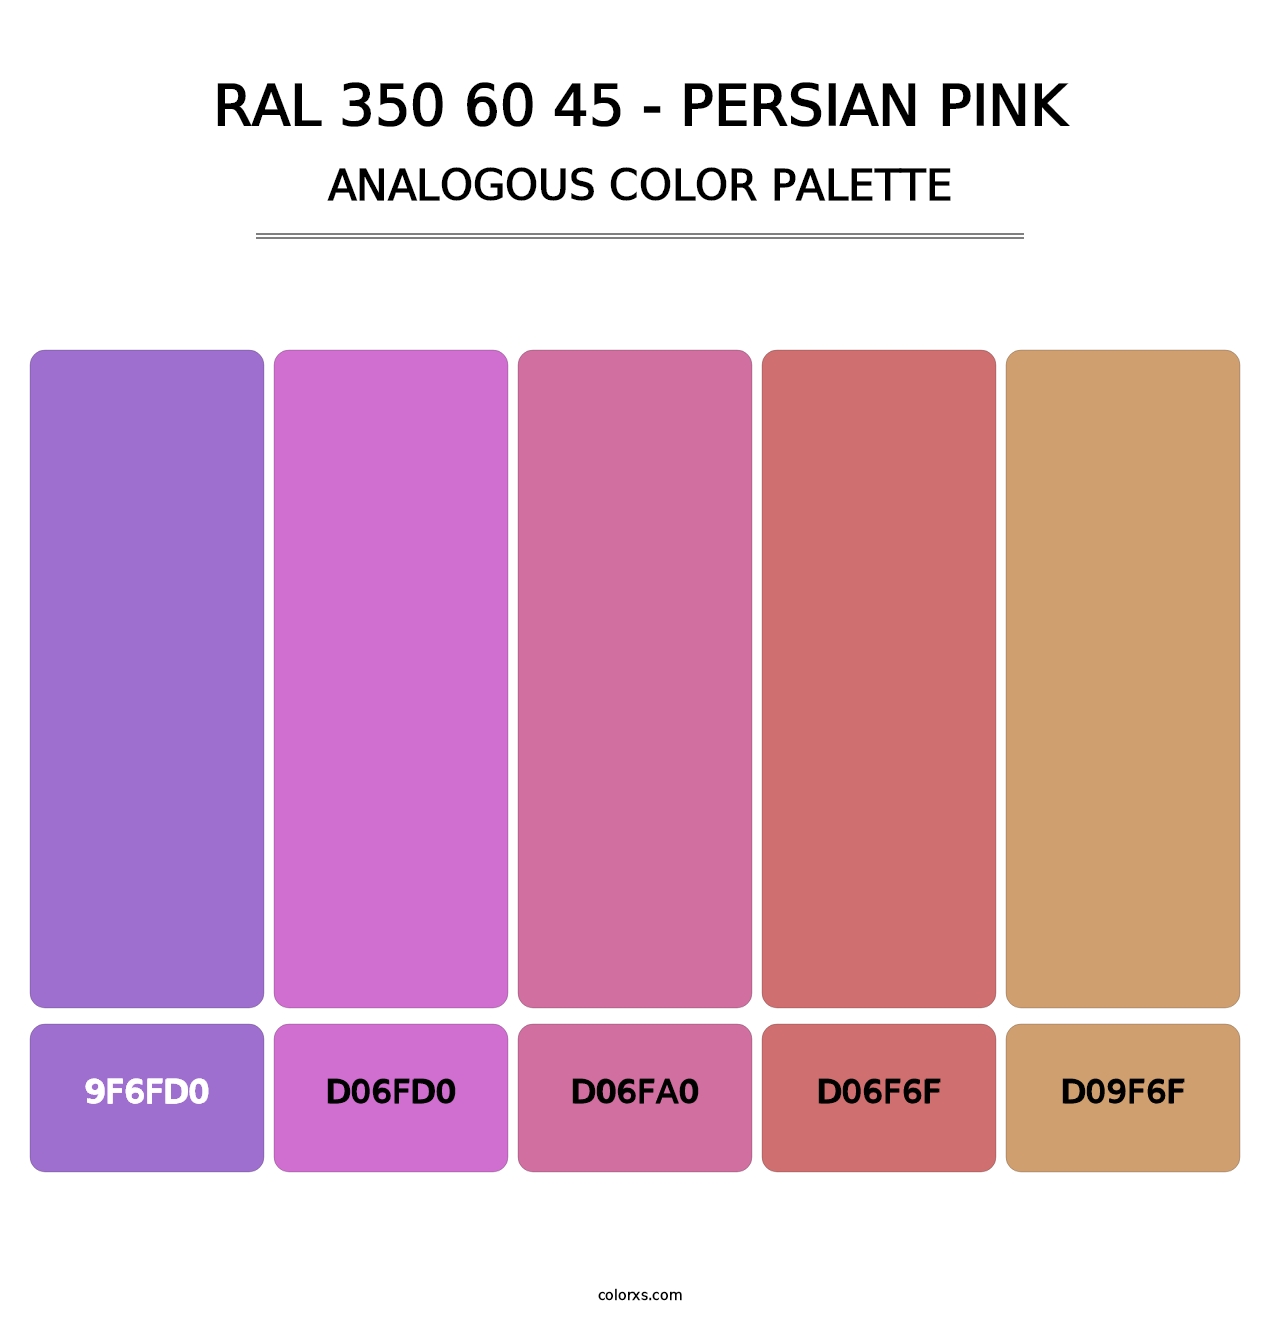 RAL 350 60 45 - Persian Pink - Analogous Color Palette